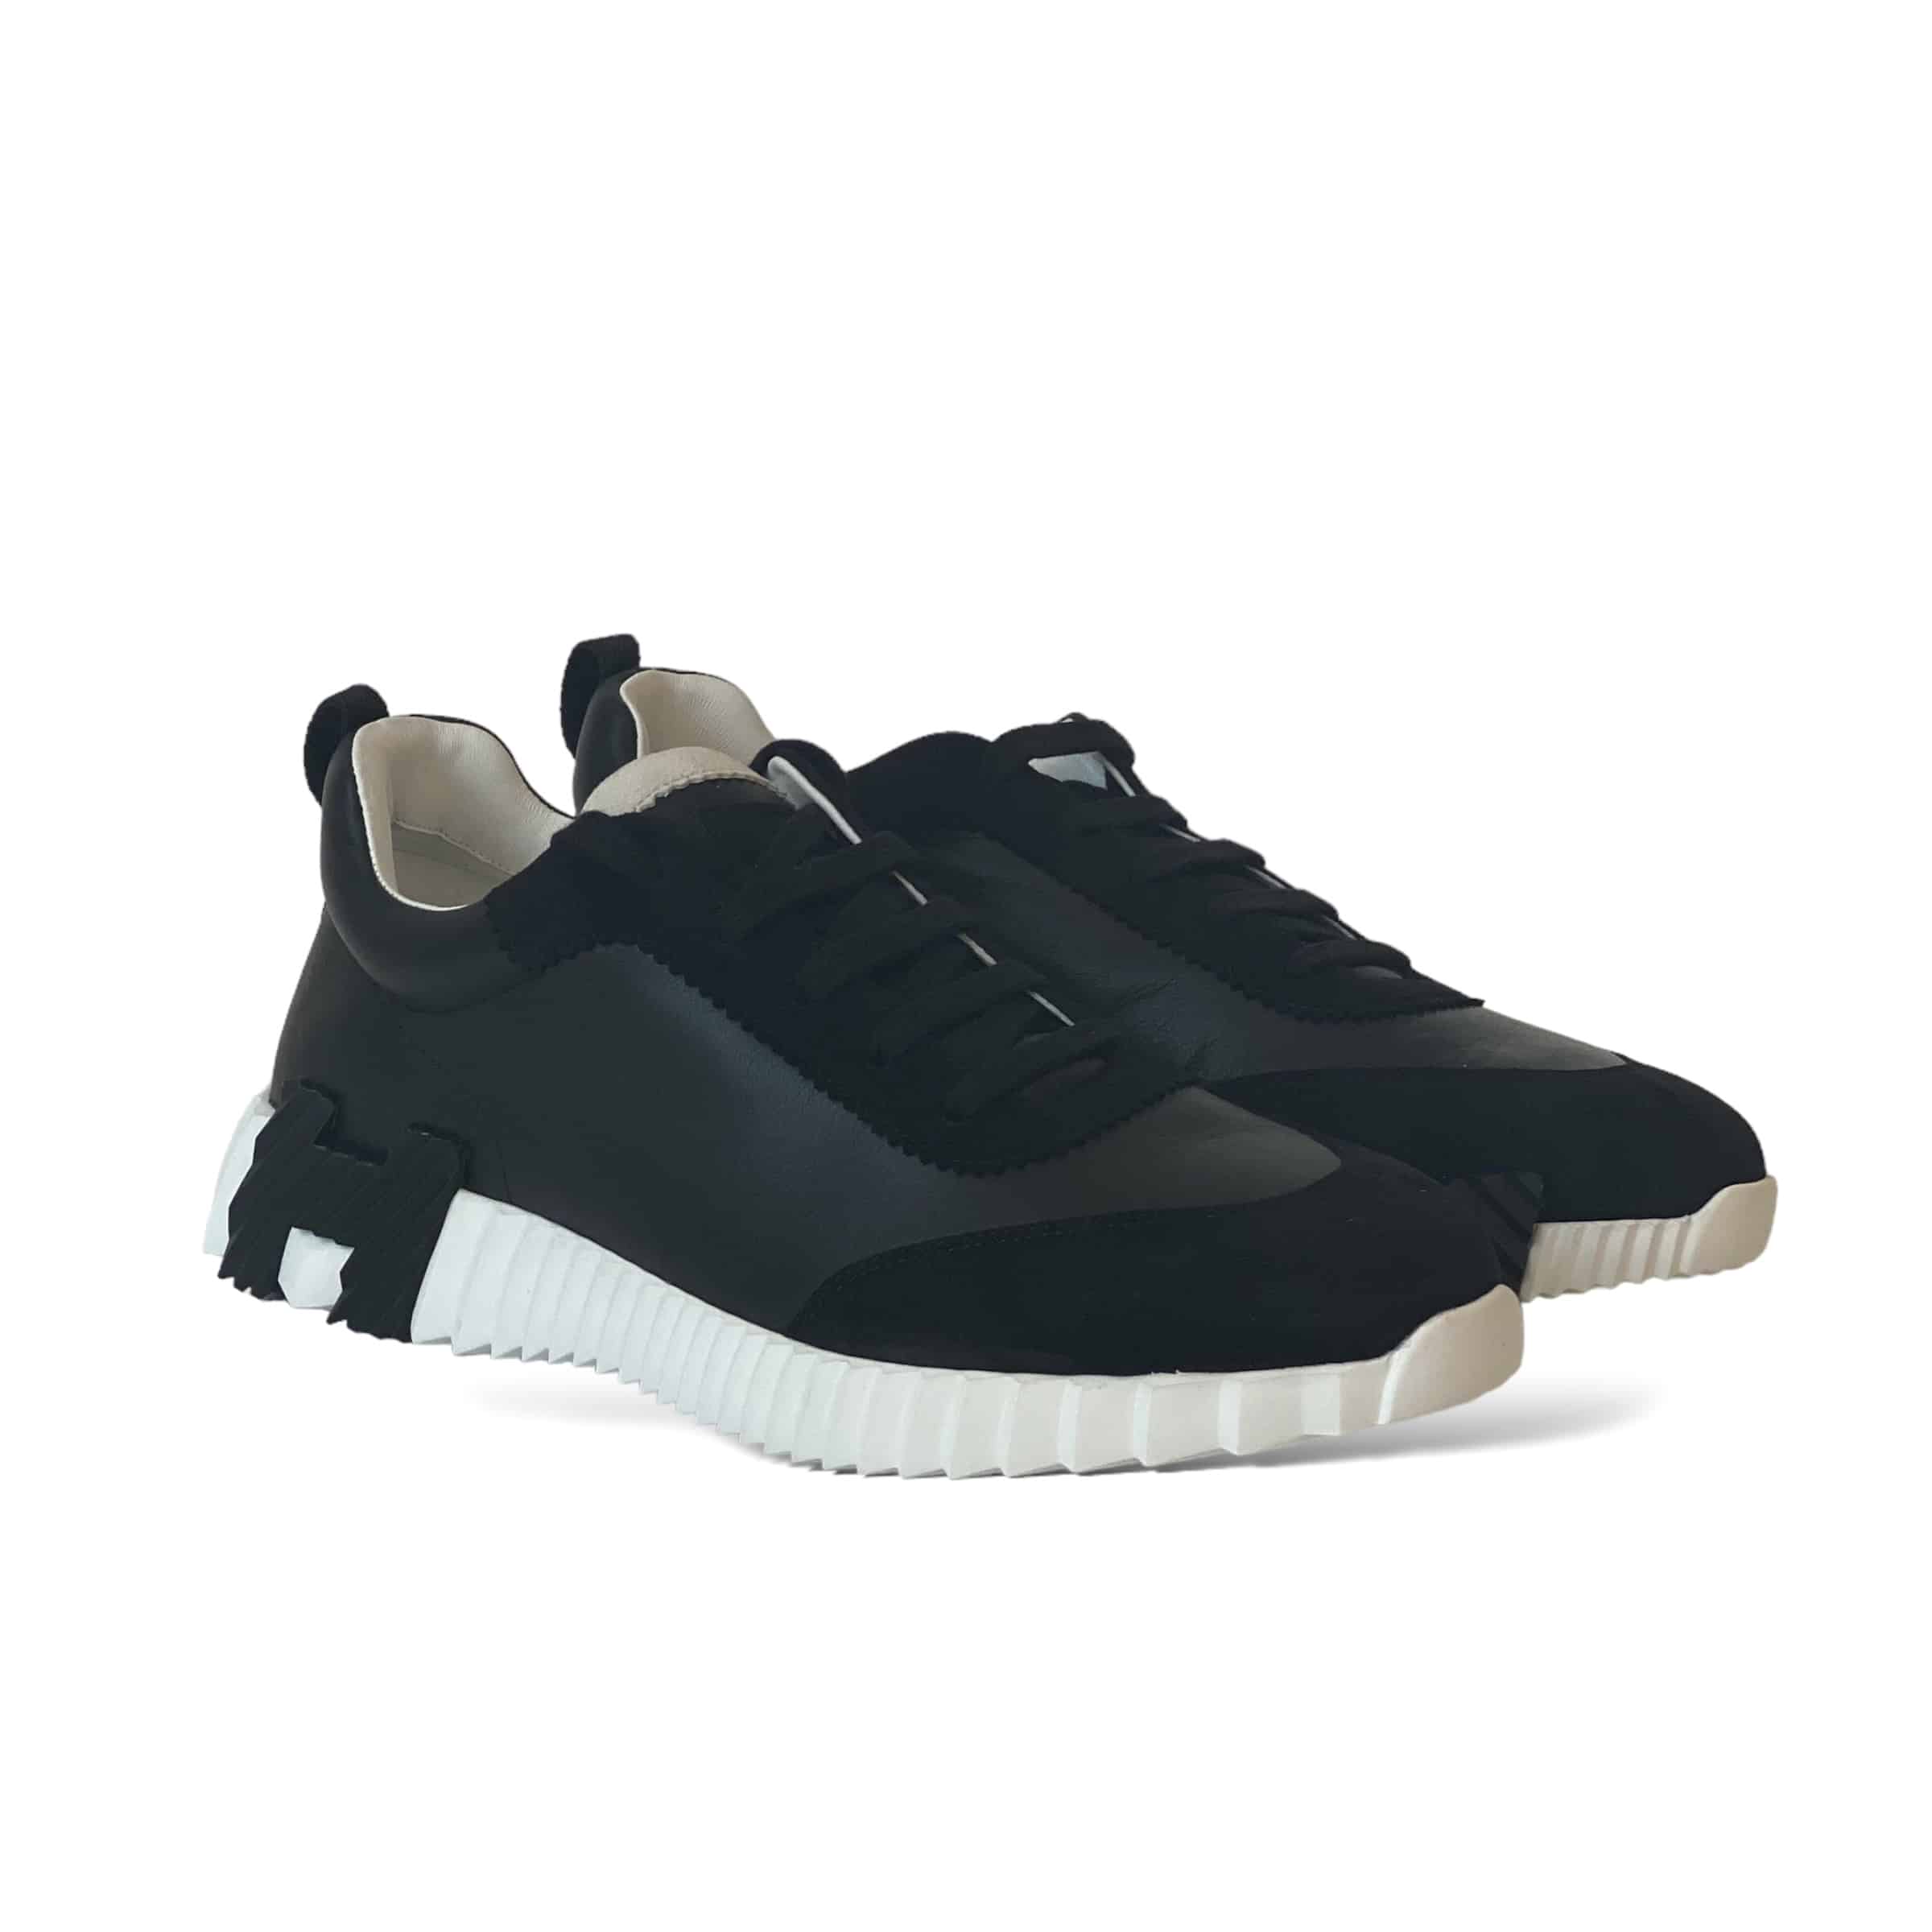 Hermes Bouncing Size 42.5 EU Sneakers Black and White | The Luxury Flavor